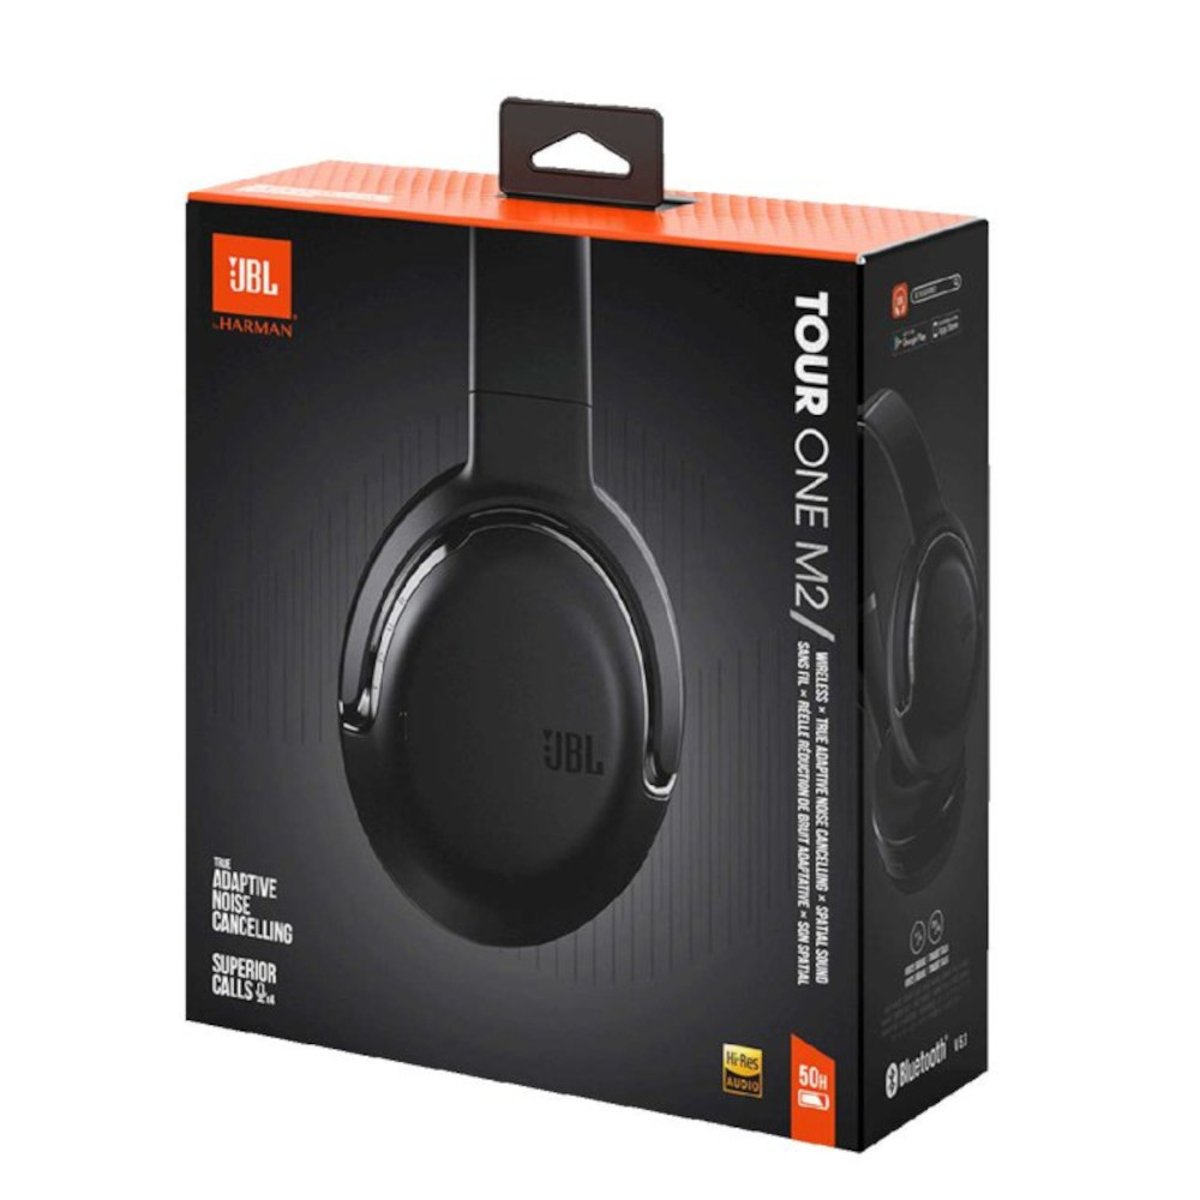 Wireless Champagne Headphones Tour Noise M2 Over-Ear Verishop Black Cancelling One JBL |